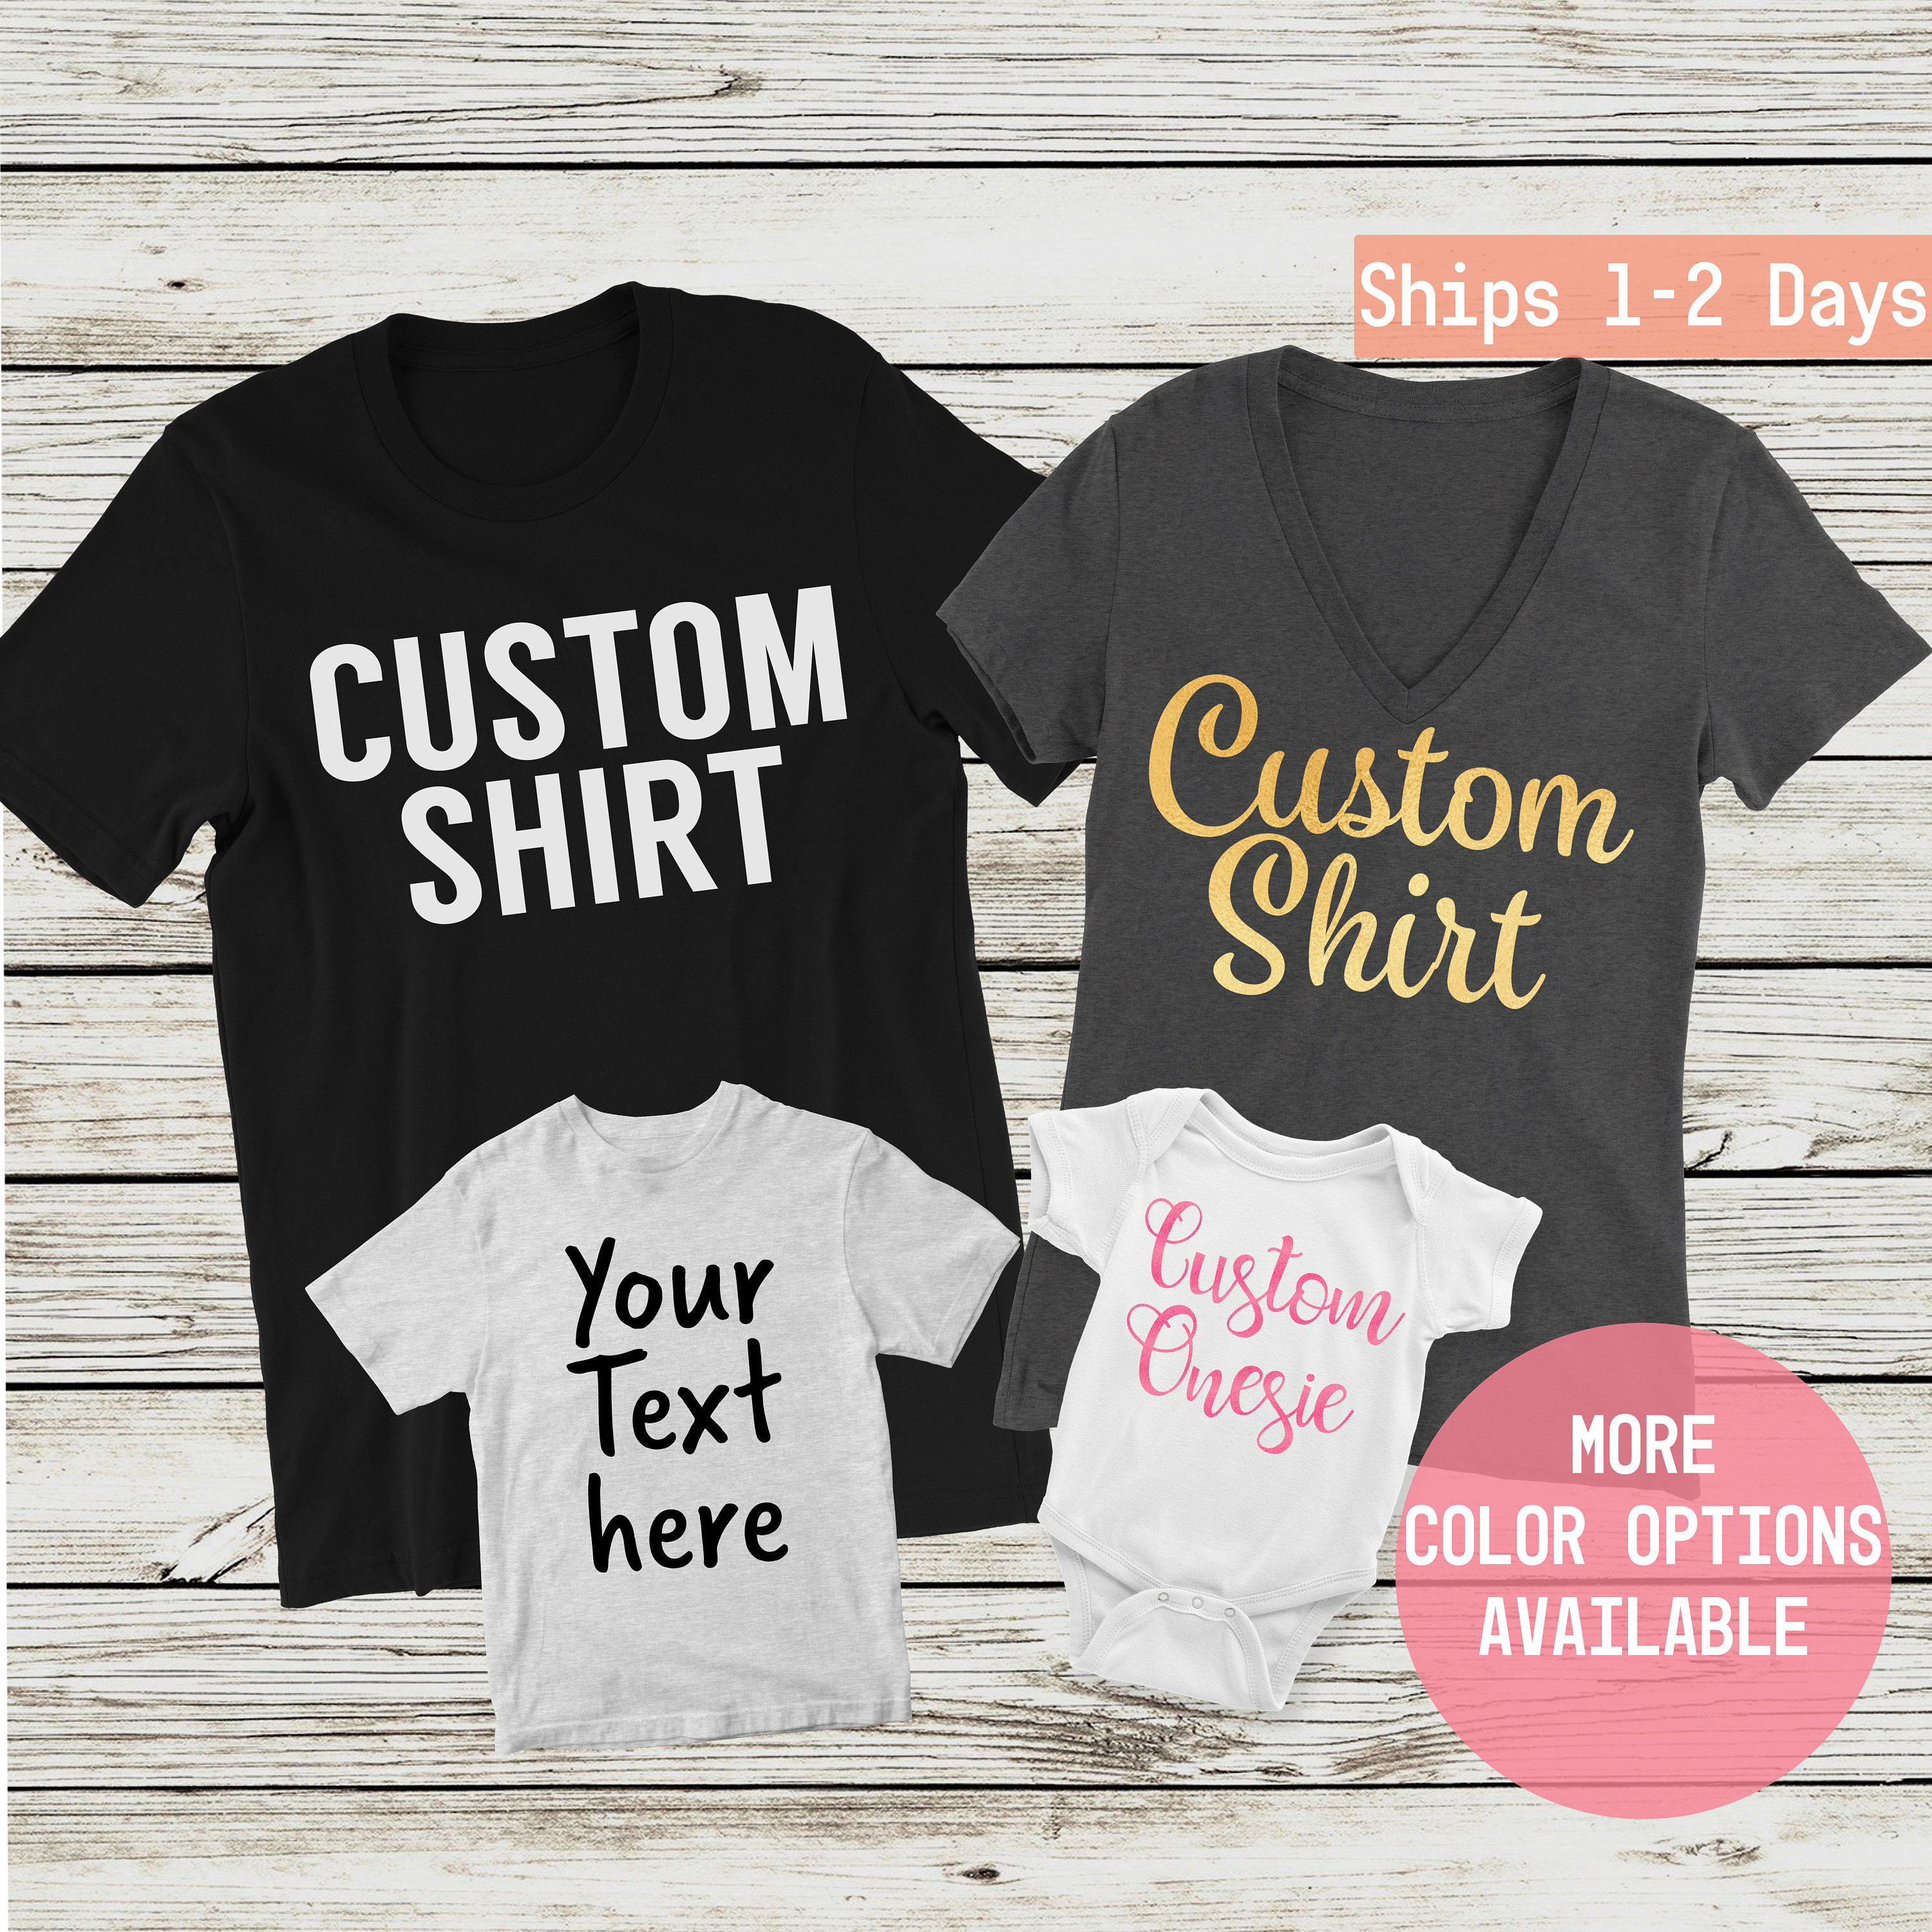 4 Fantastic Ways Custom T-Shirts Help Promote Your Business